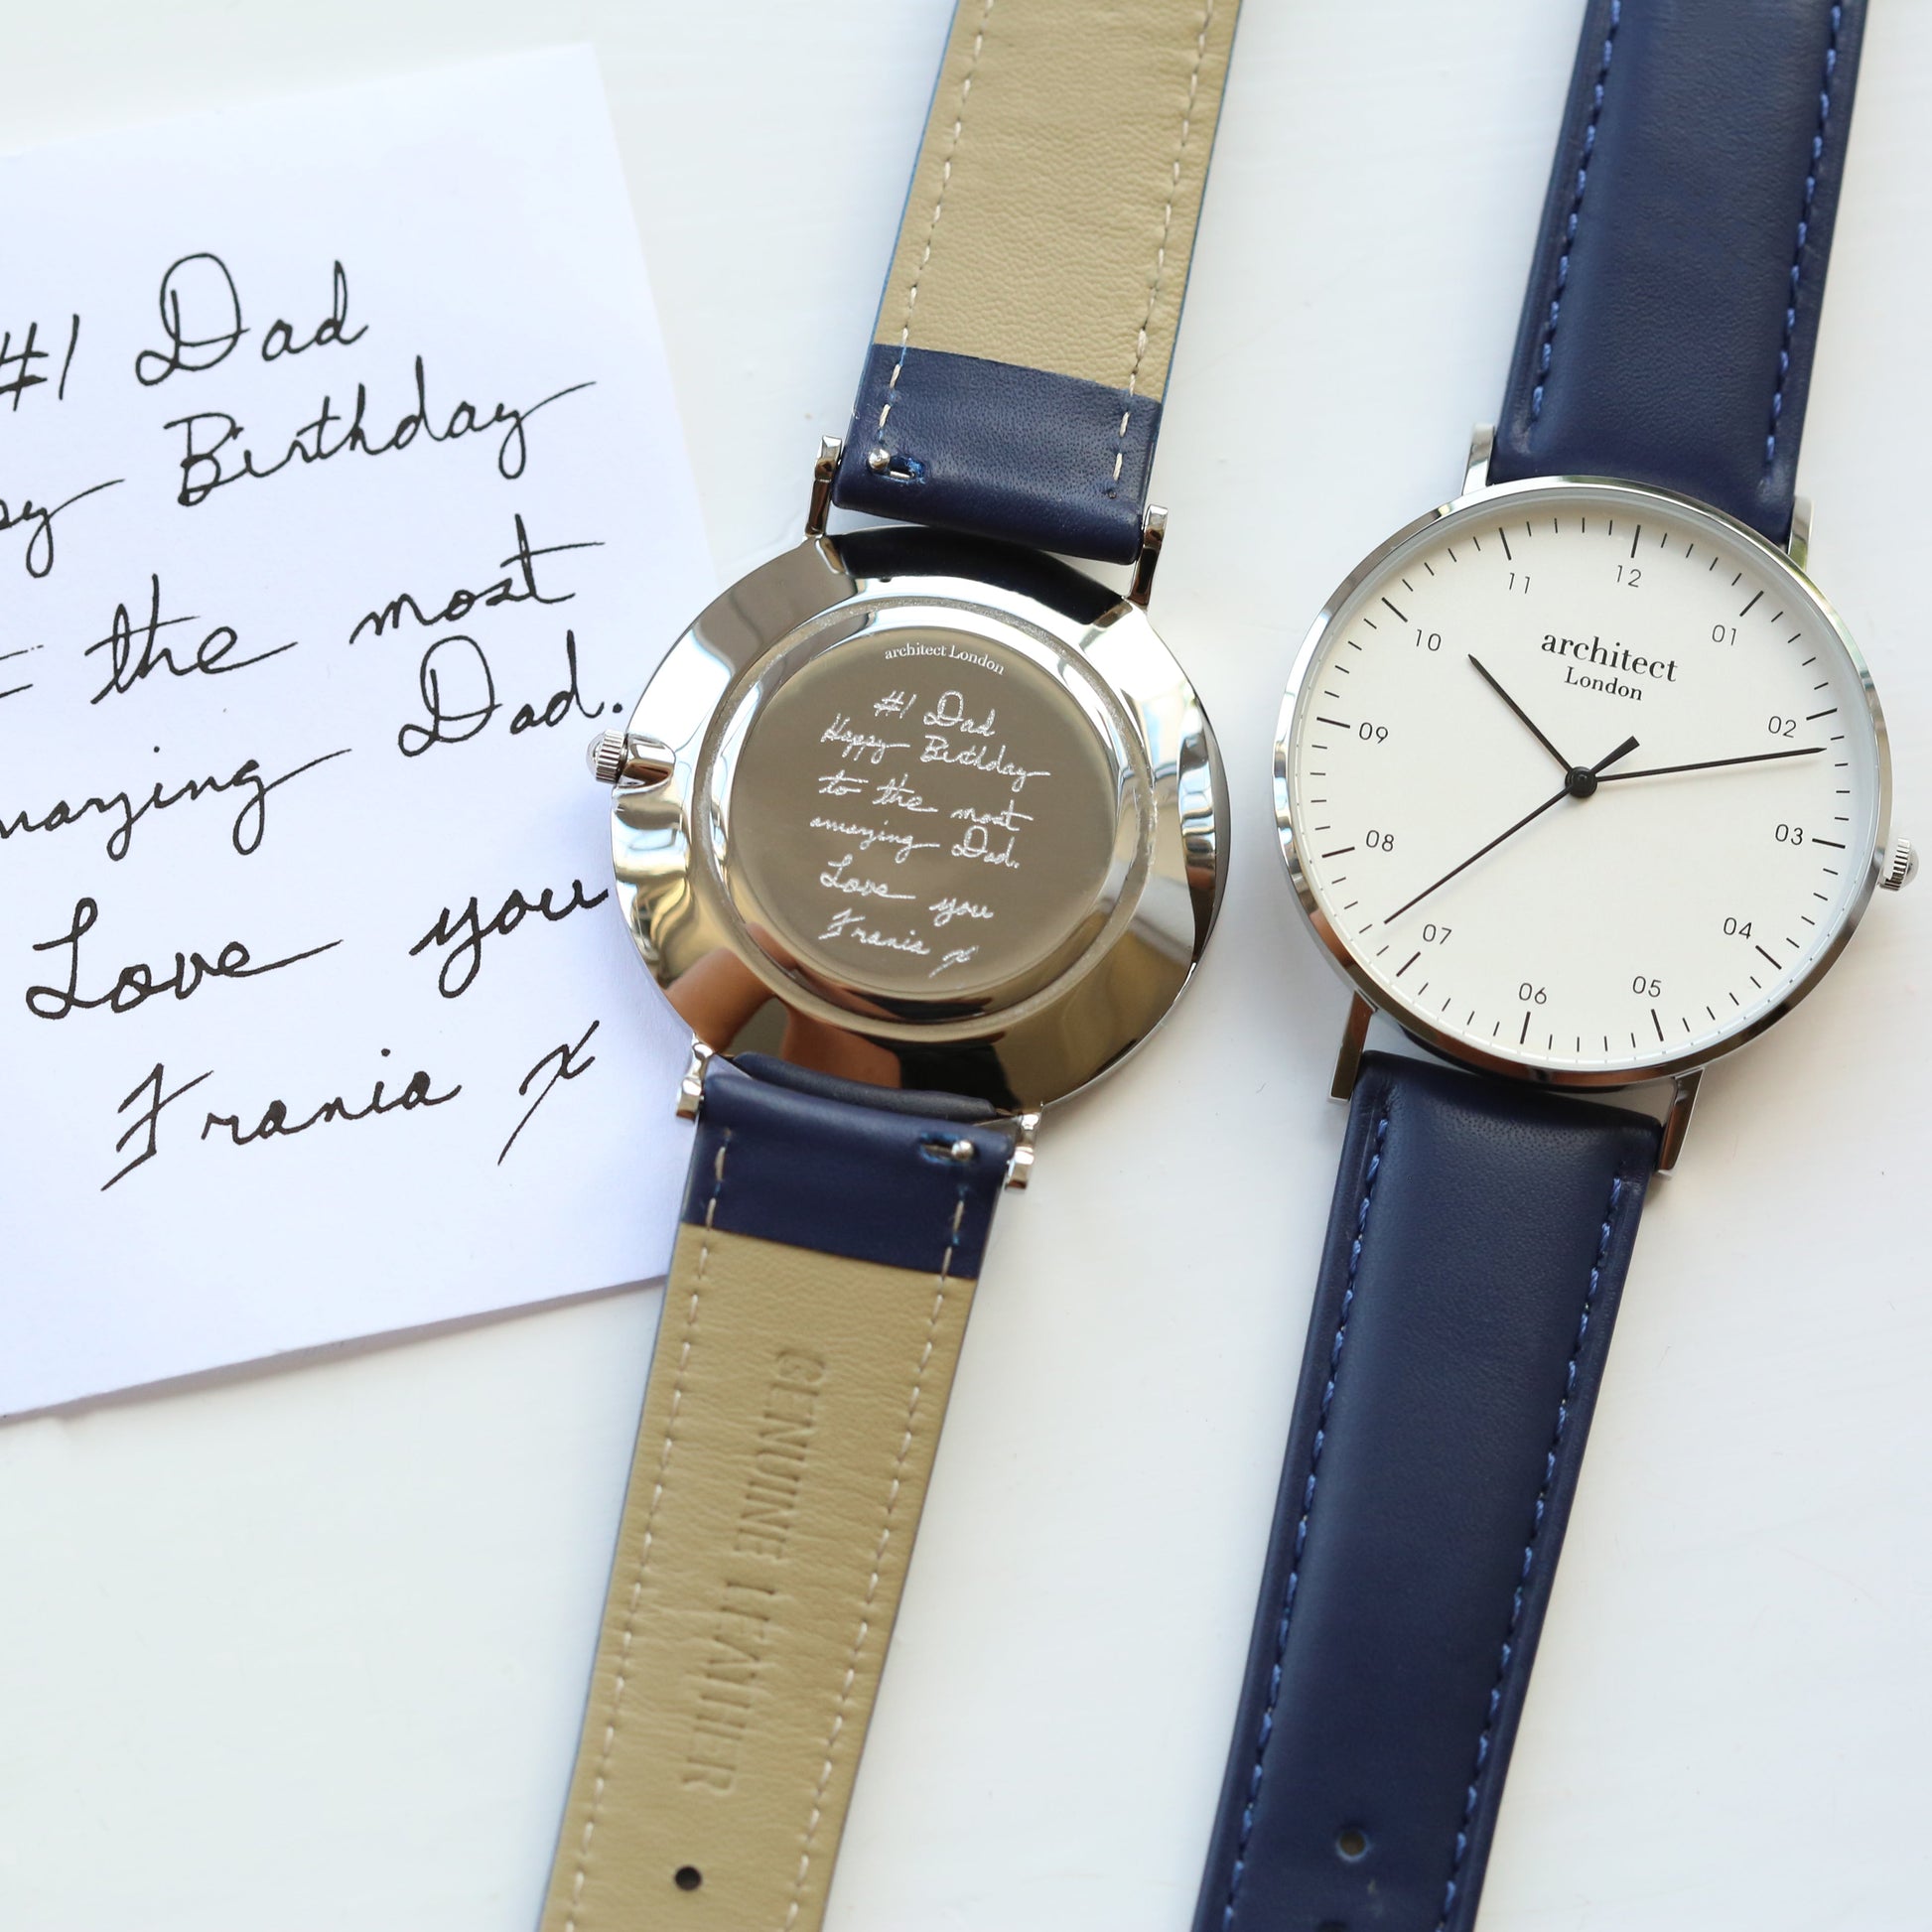 Personalized Men's Watches - Men's Handwriting Engraved Watch - Architect Zephyr + Admiral Blue 